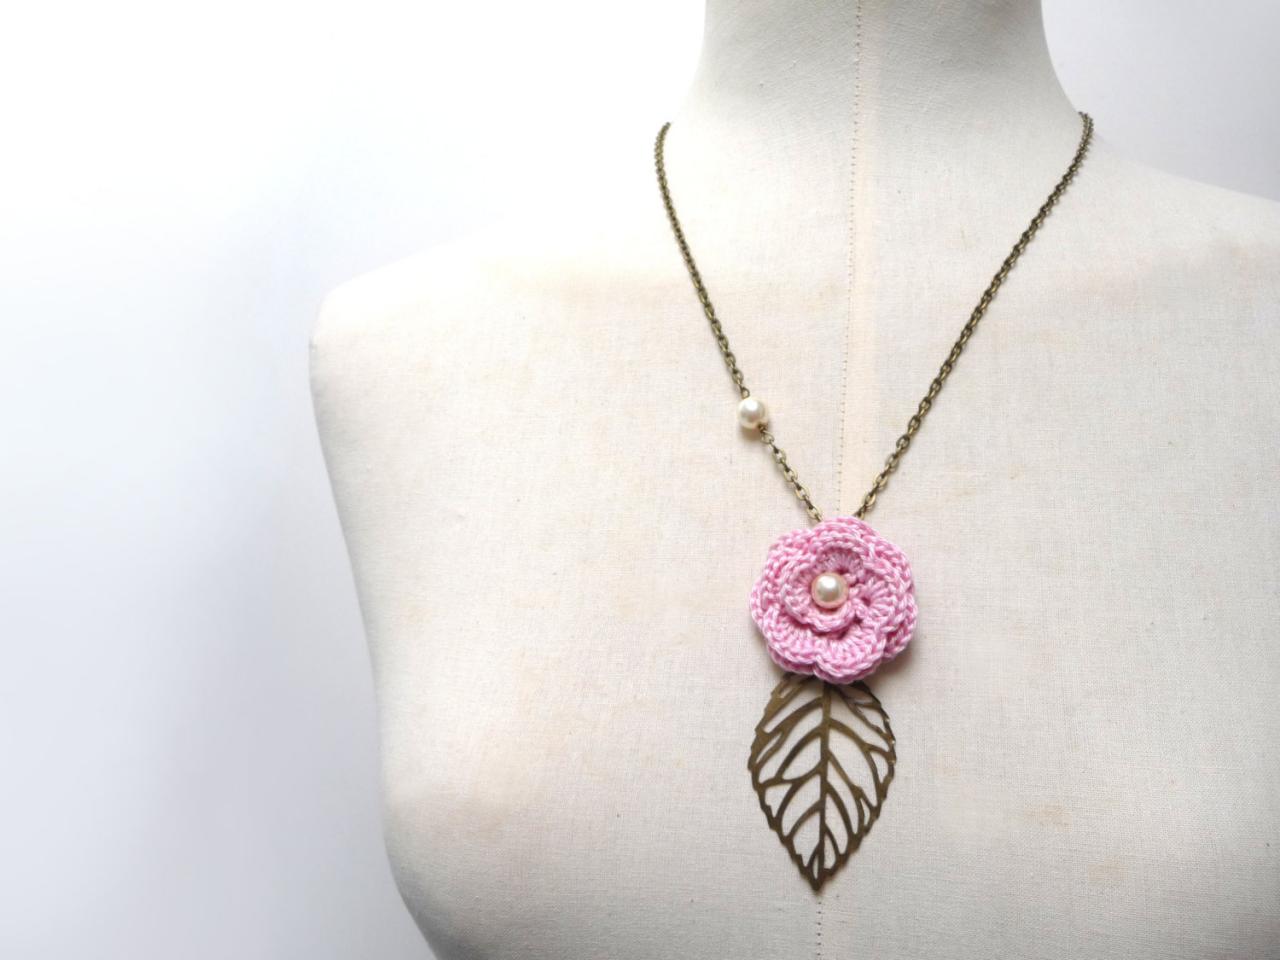 Crochet Flower Necklace With Brass Chain And Leaf - Pink Cotton Flower With Pearls - Choose The Color